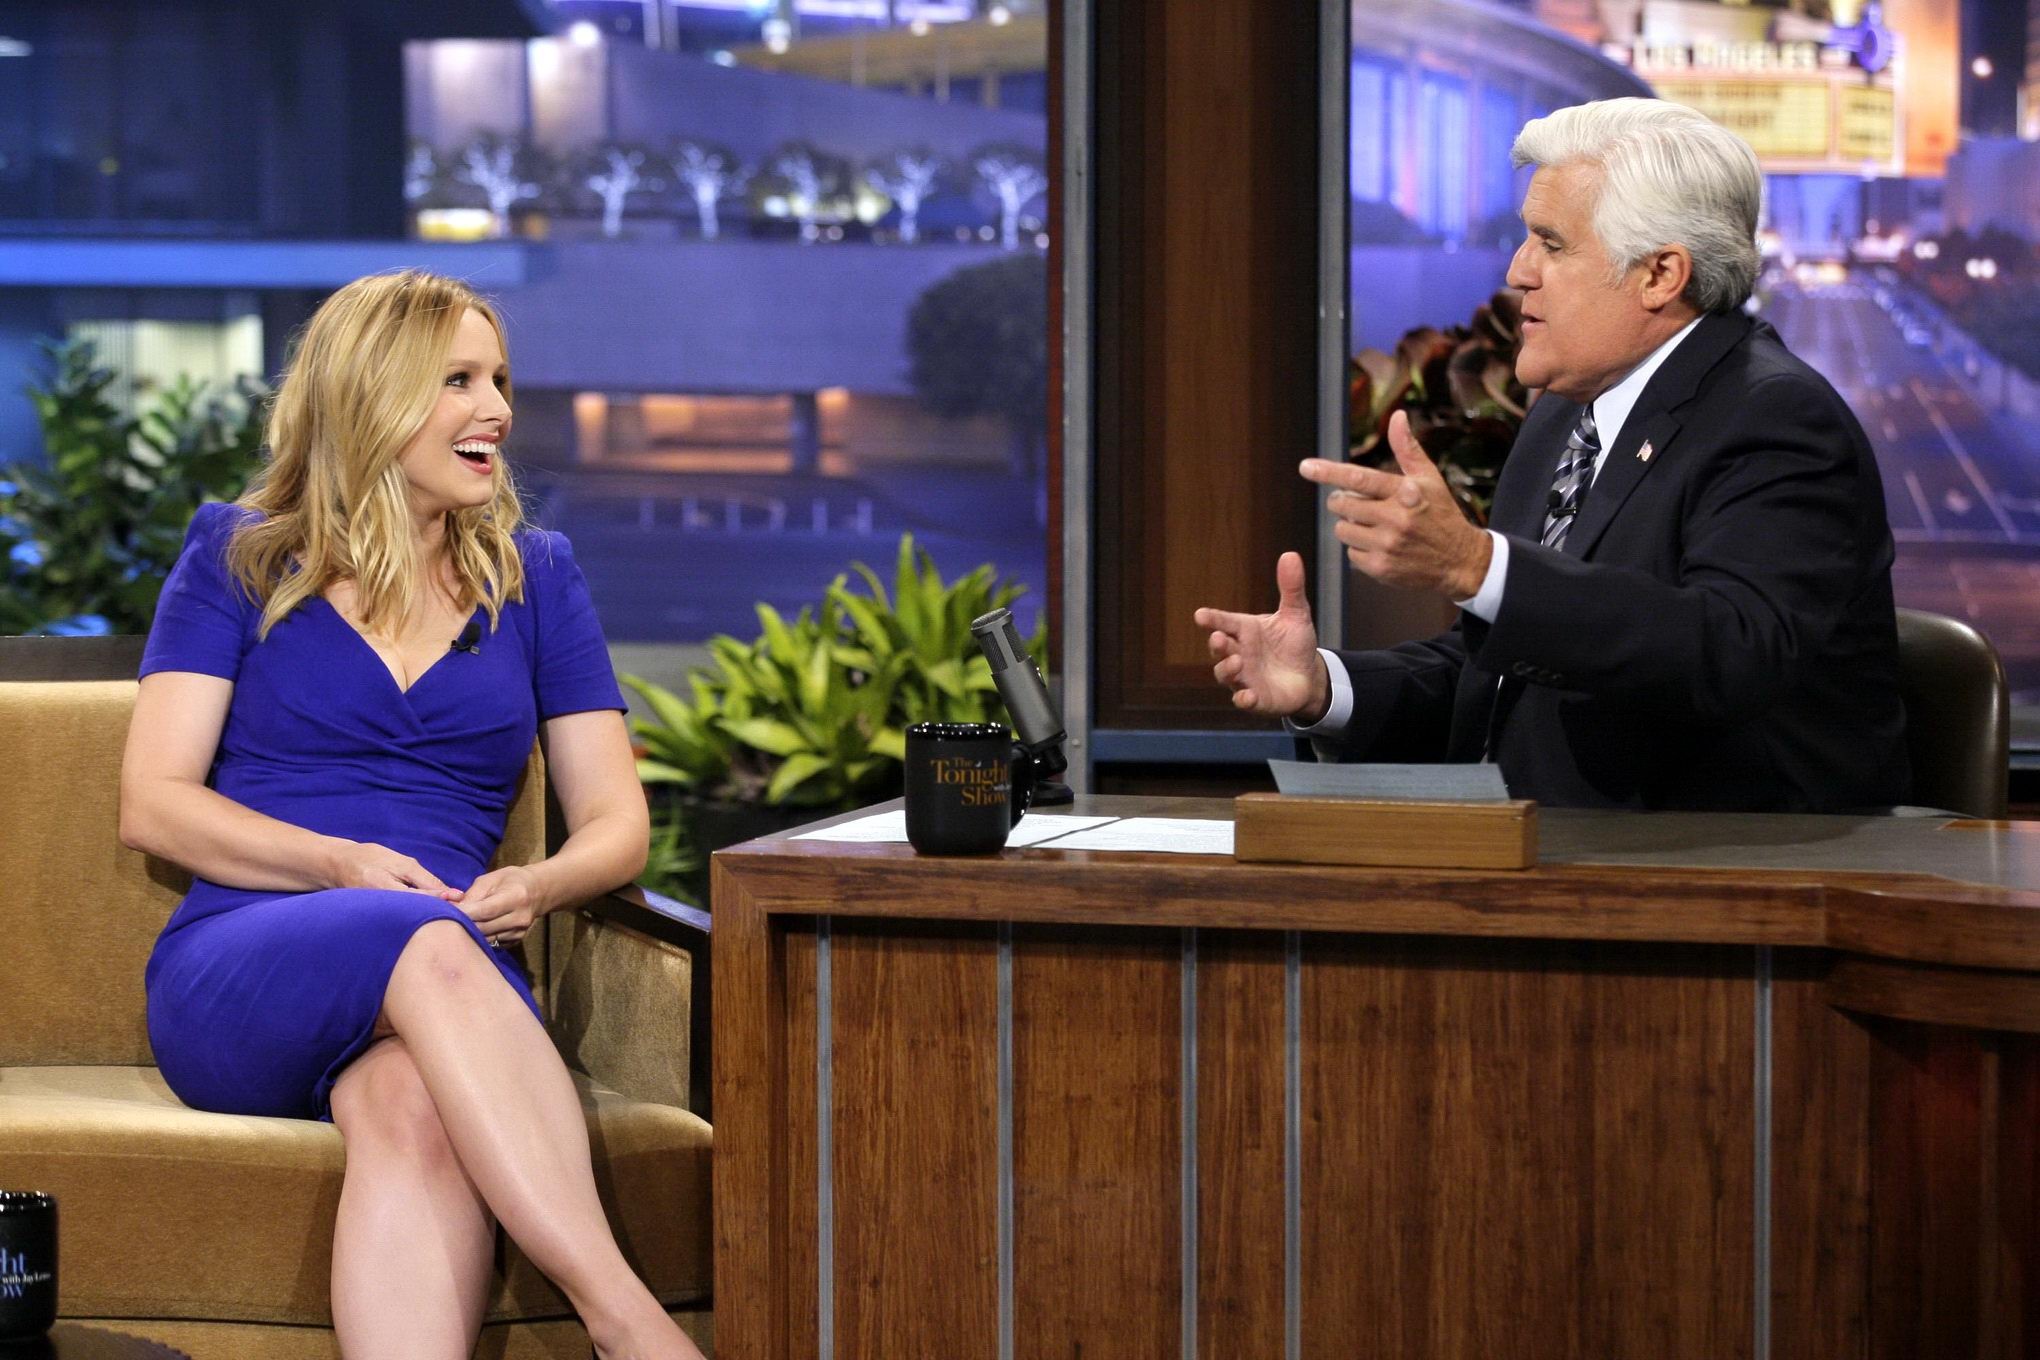 Kristen Bell showing cleavage on 'The Tonight Show with Jay Leno' in Burbank #75222992